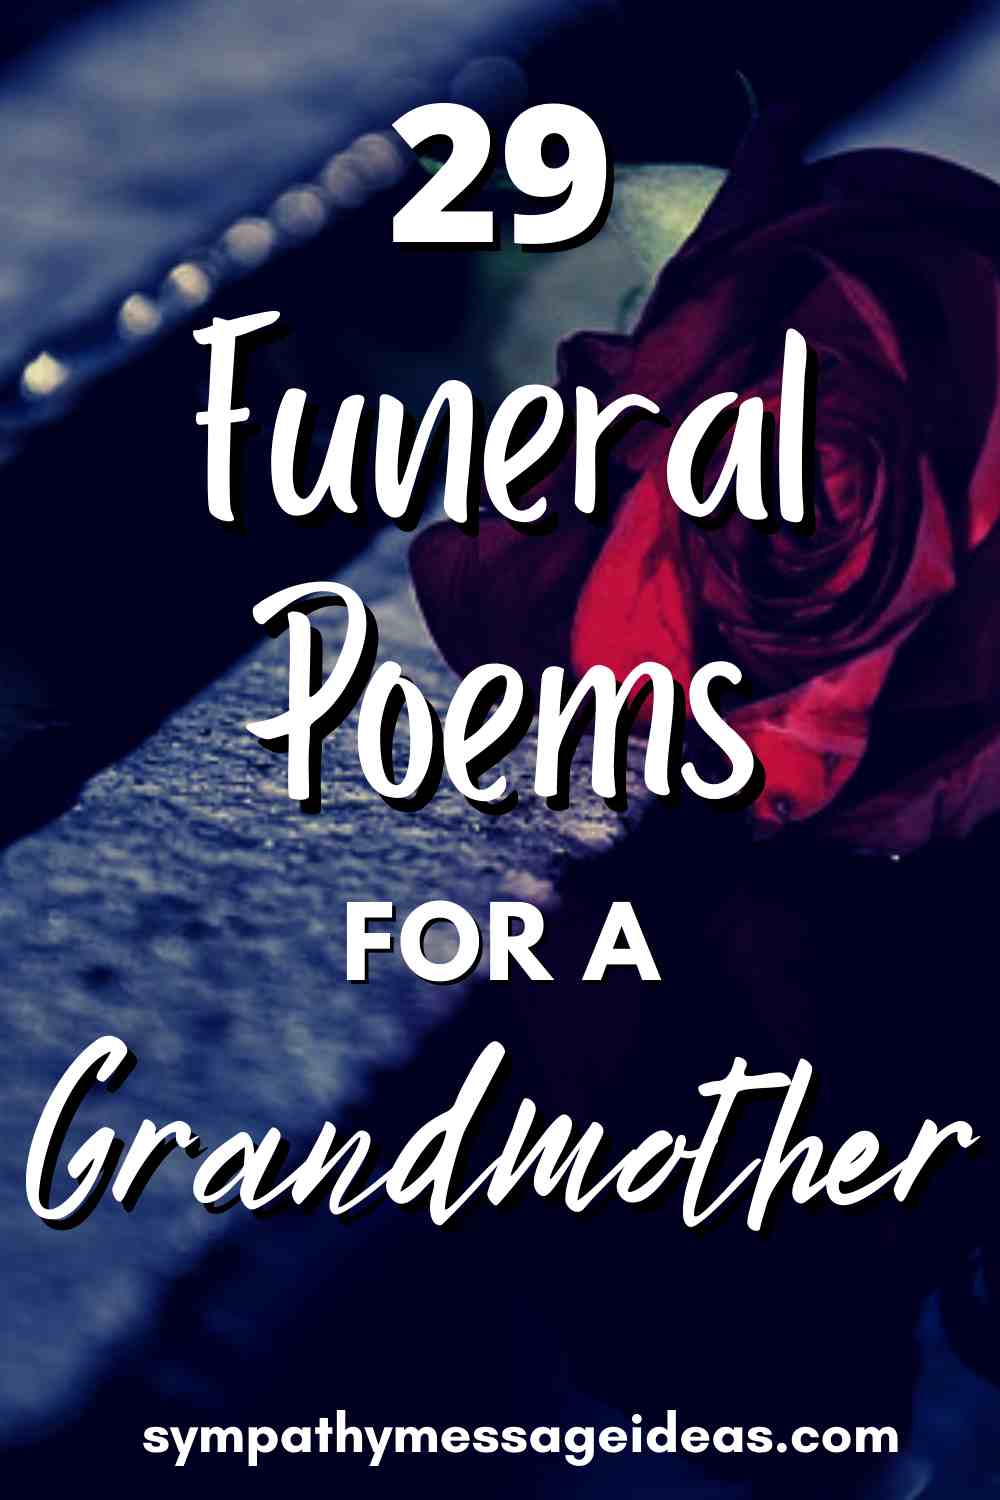 funeral poems for grandmother